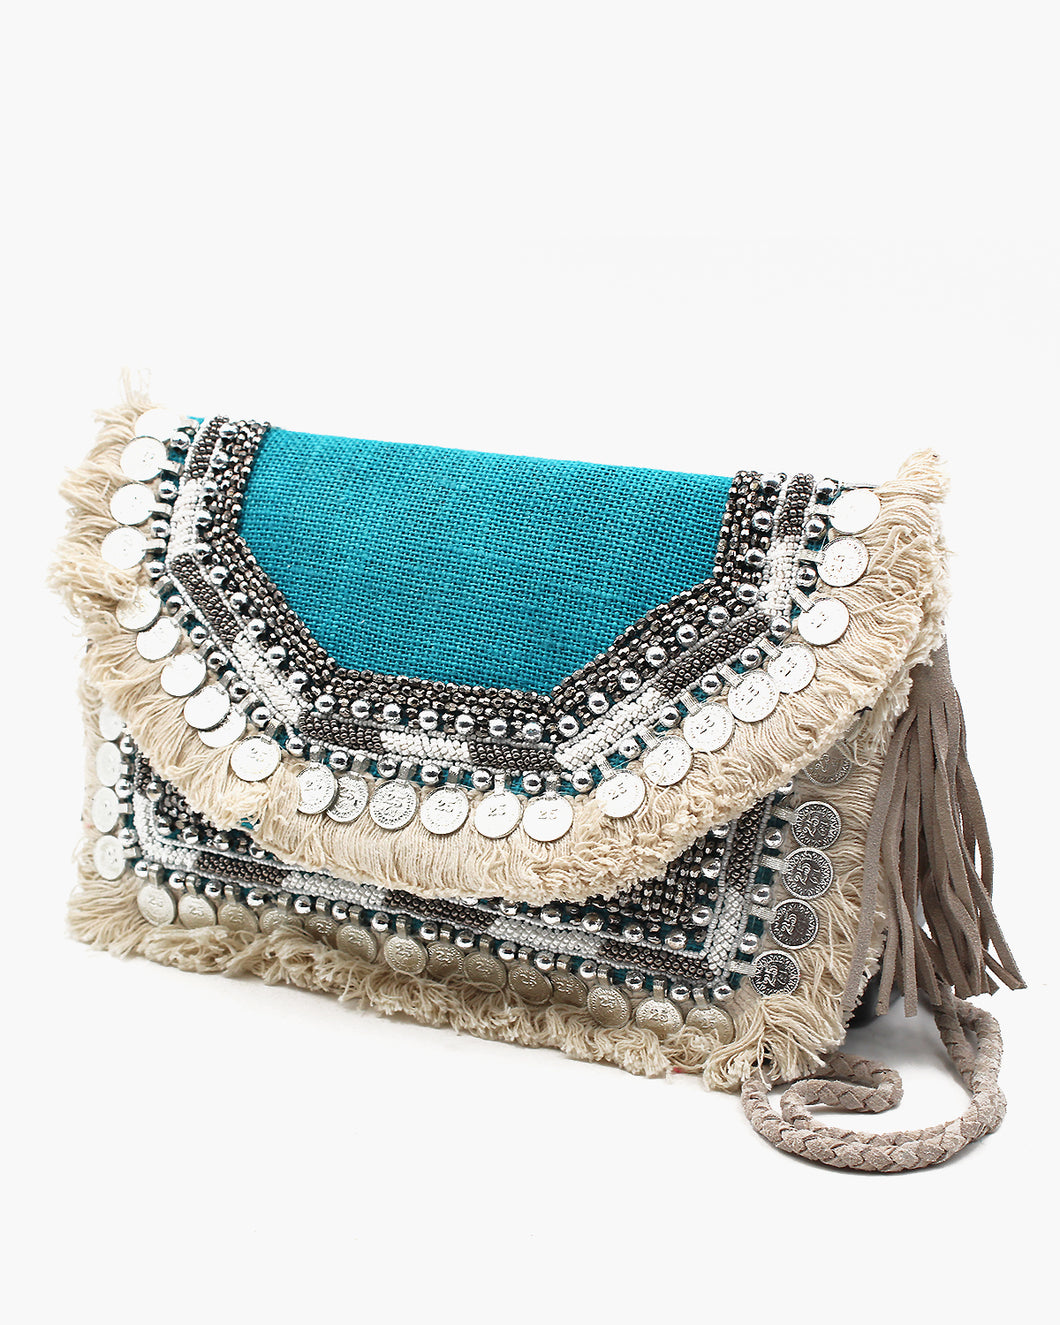 Bohemian Coin Clutch with Fringe